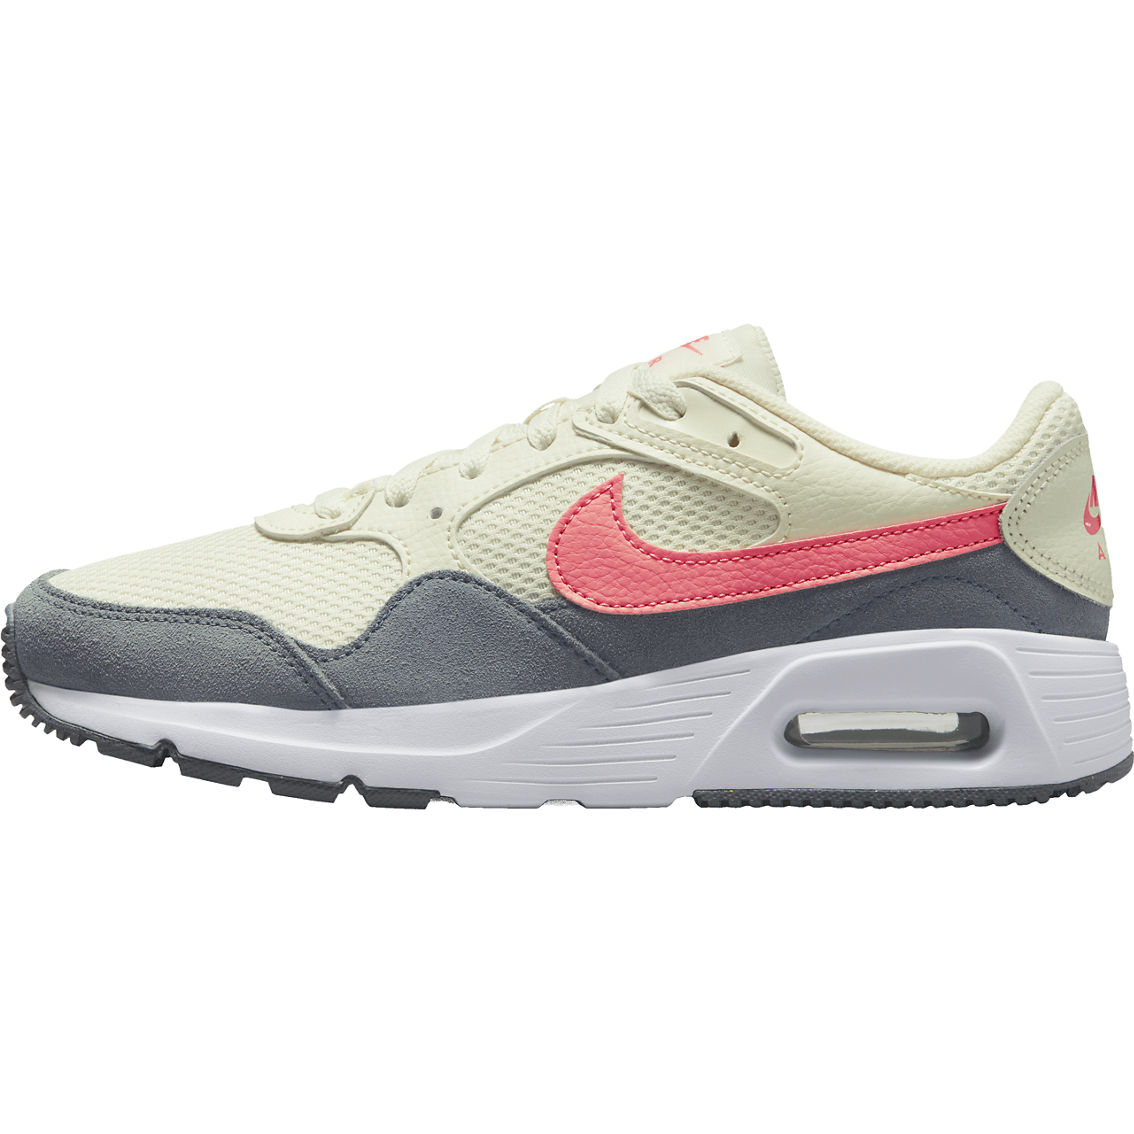 Nike Women's Air Max SC Running Shoes - Image 3 of 8